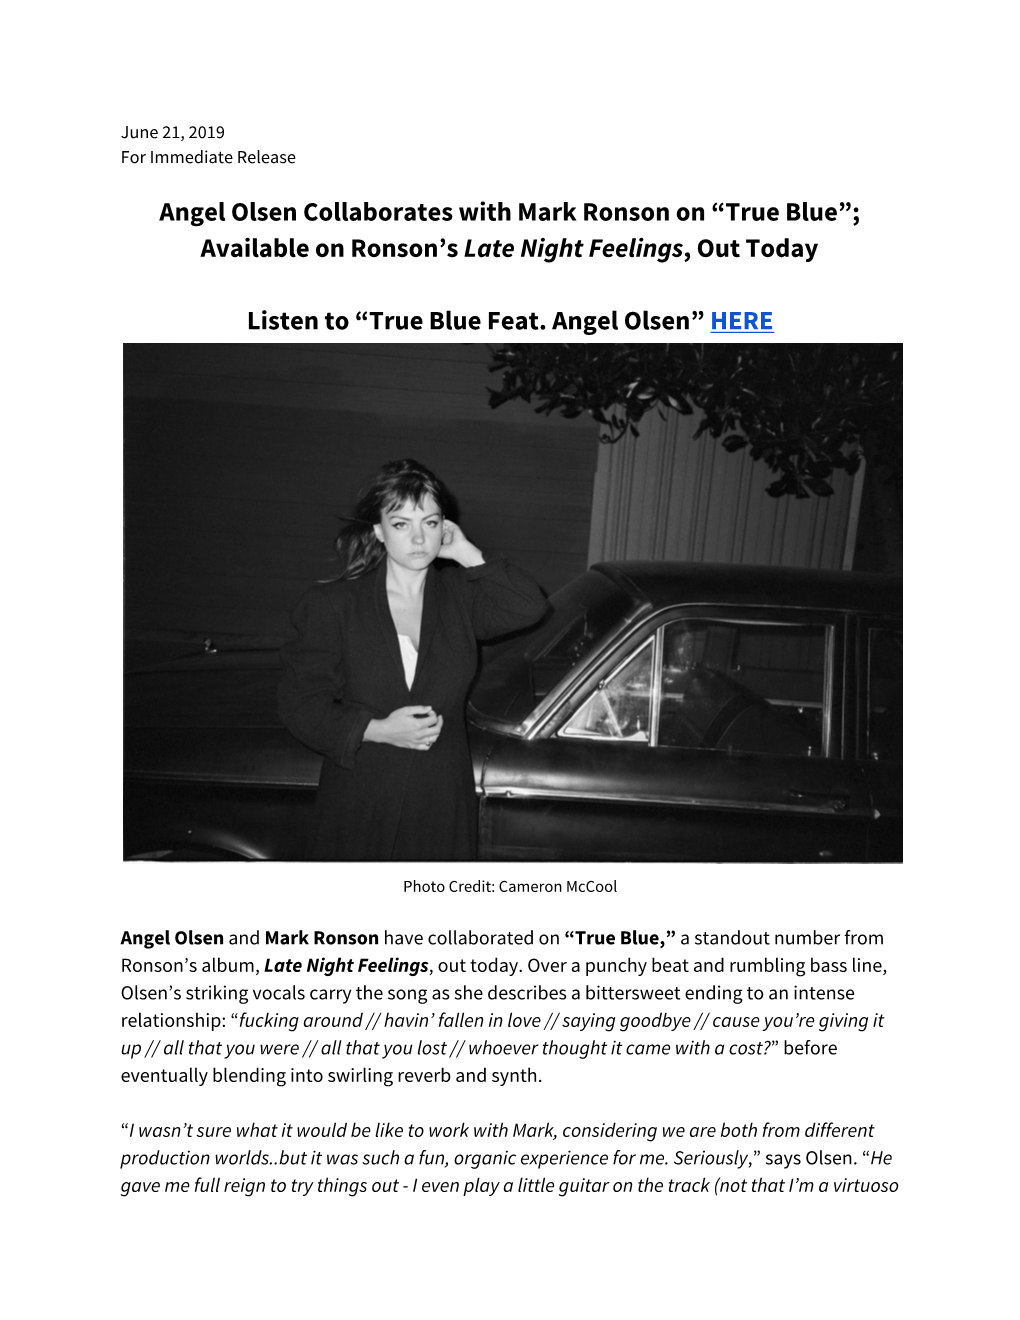 Angel Olsen Collaborates with Mark Ronson on “True Blue”; Available on Ronson’S Late Night Feelings, out Today ​ ​